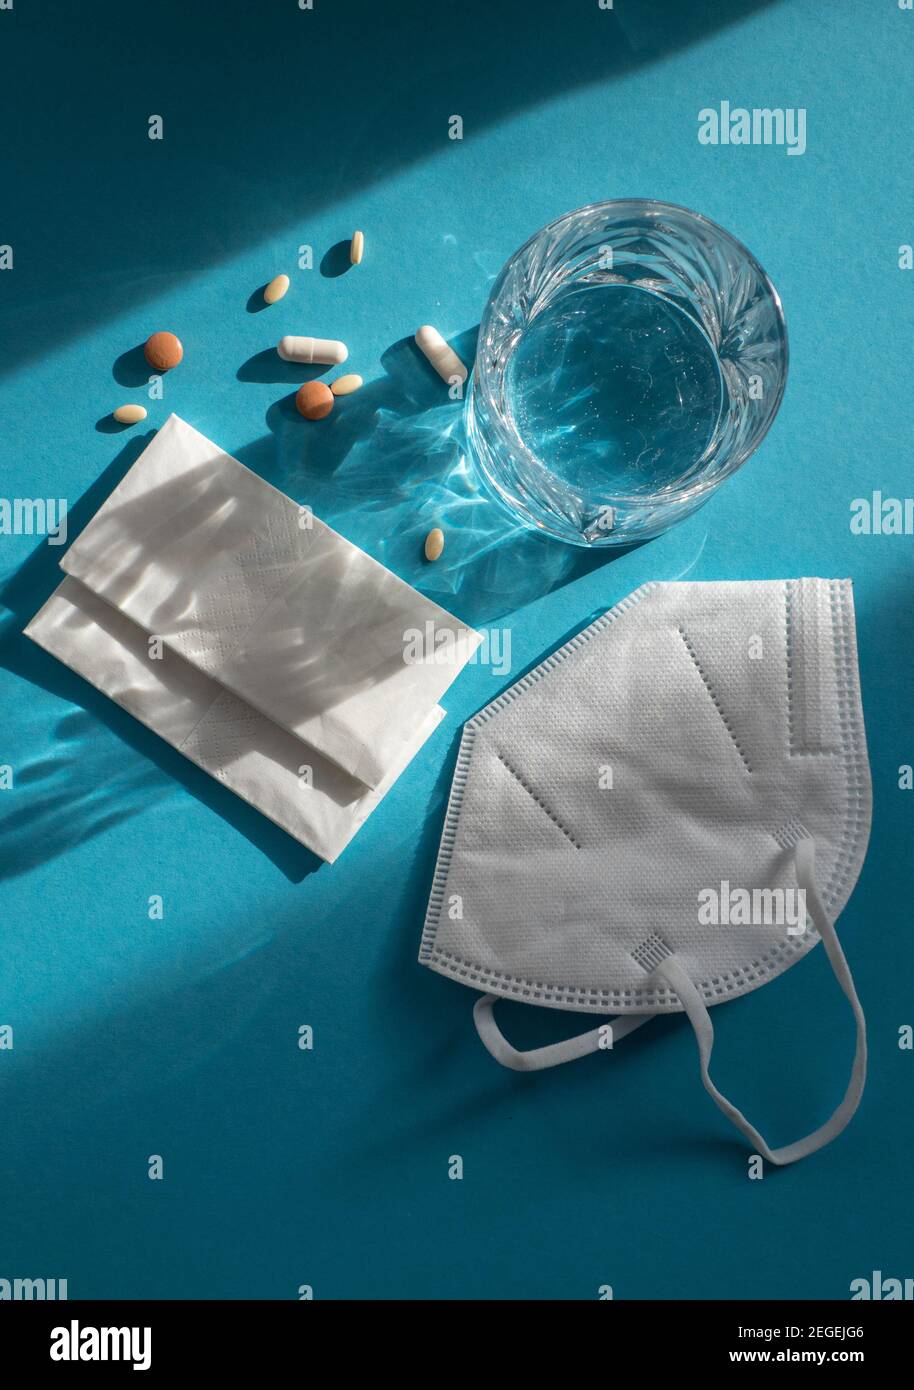 Medicine, water and tissues for a possible Corona infection or cold Stock Photo